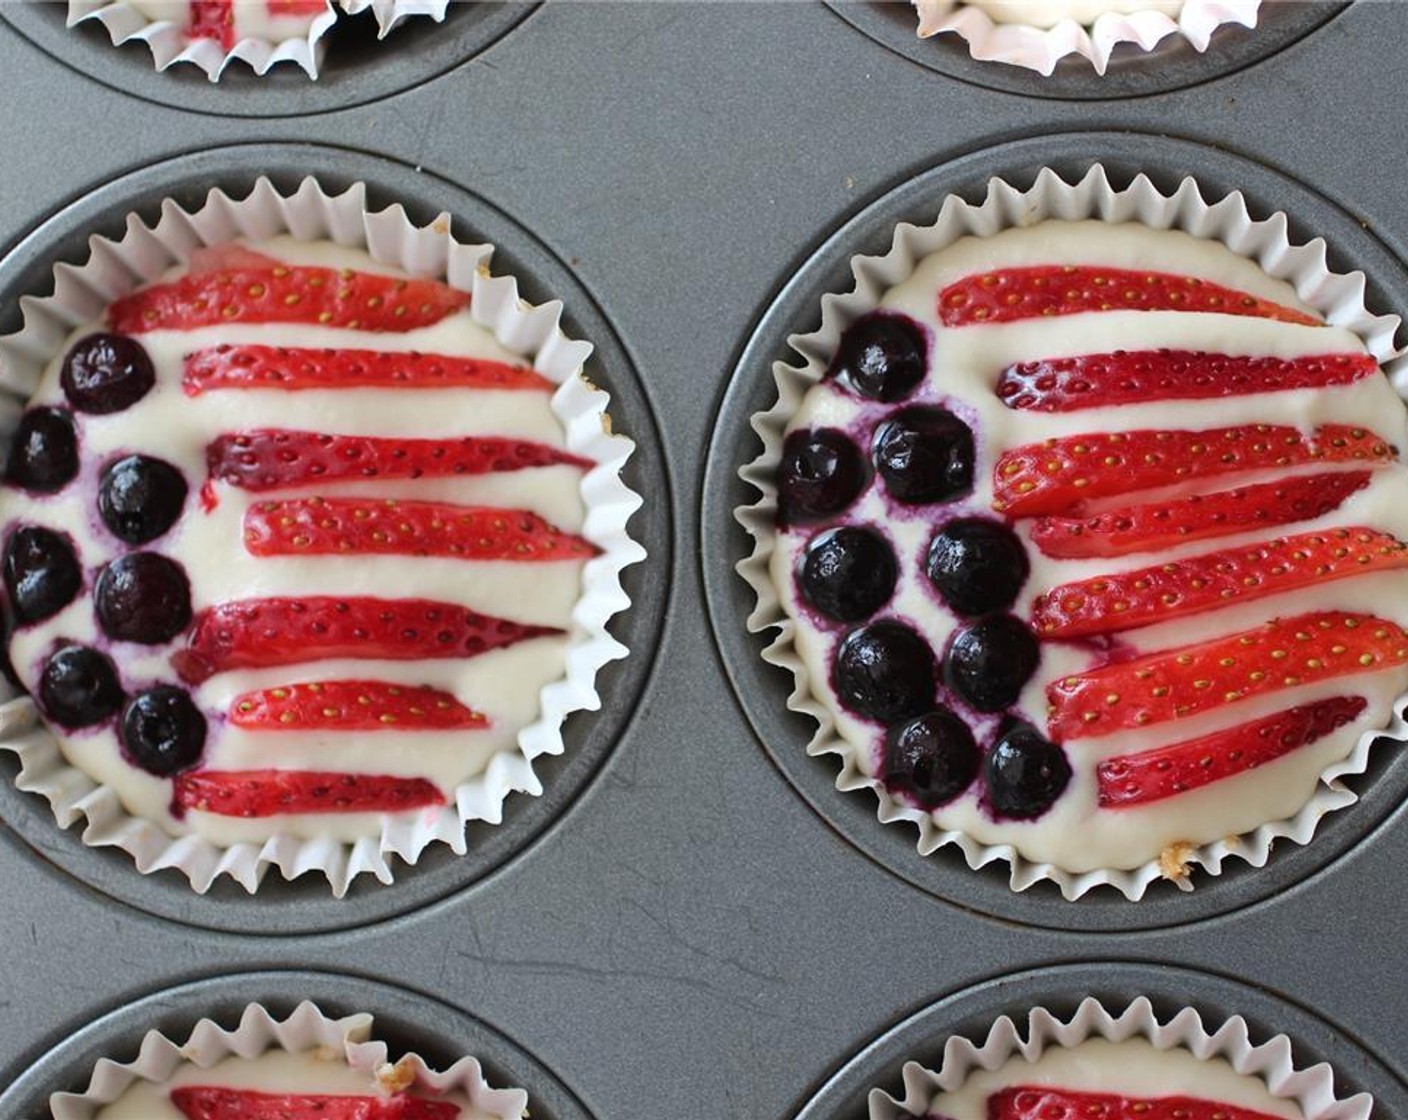 step 9 Using a toothpick through the fruit, carefully push the strawberries and Frozen Blueberries (1/2 cup) into the cheesecakes into your favorite stars and stripes pattern.